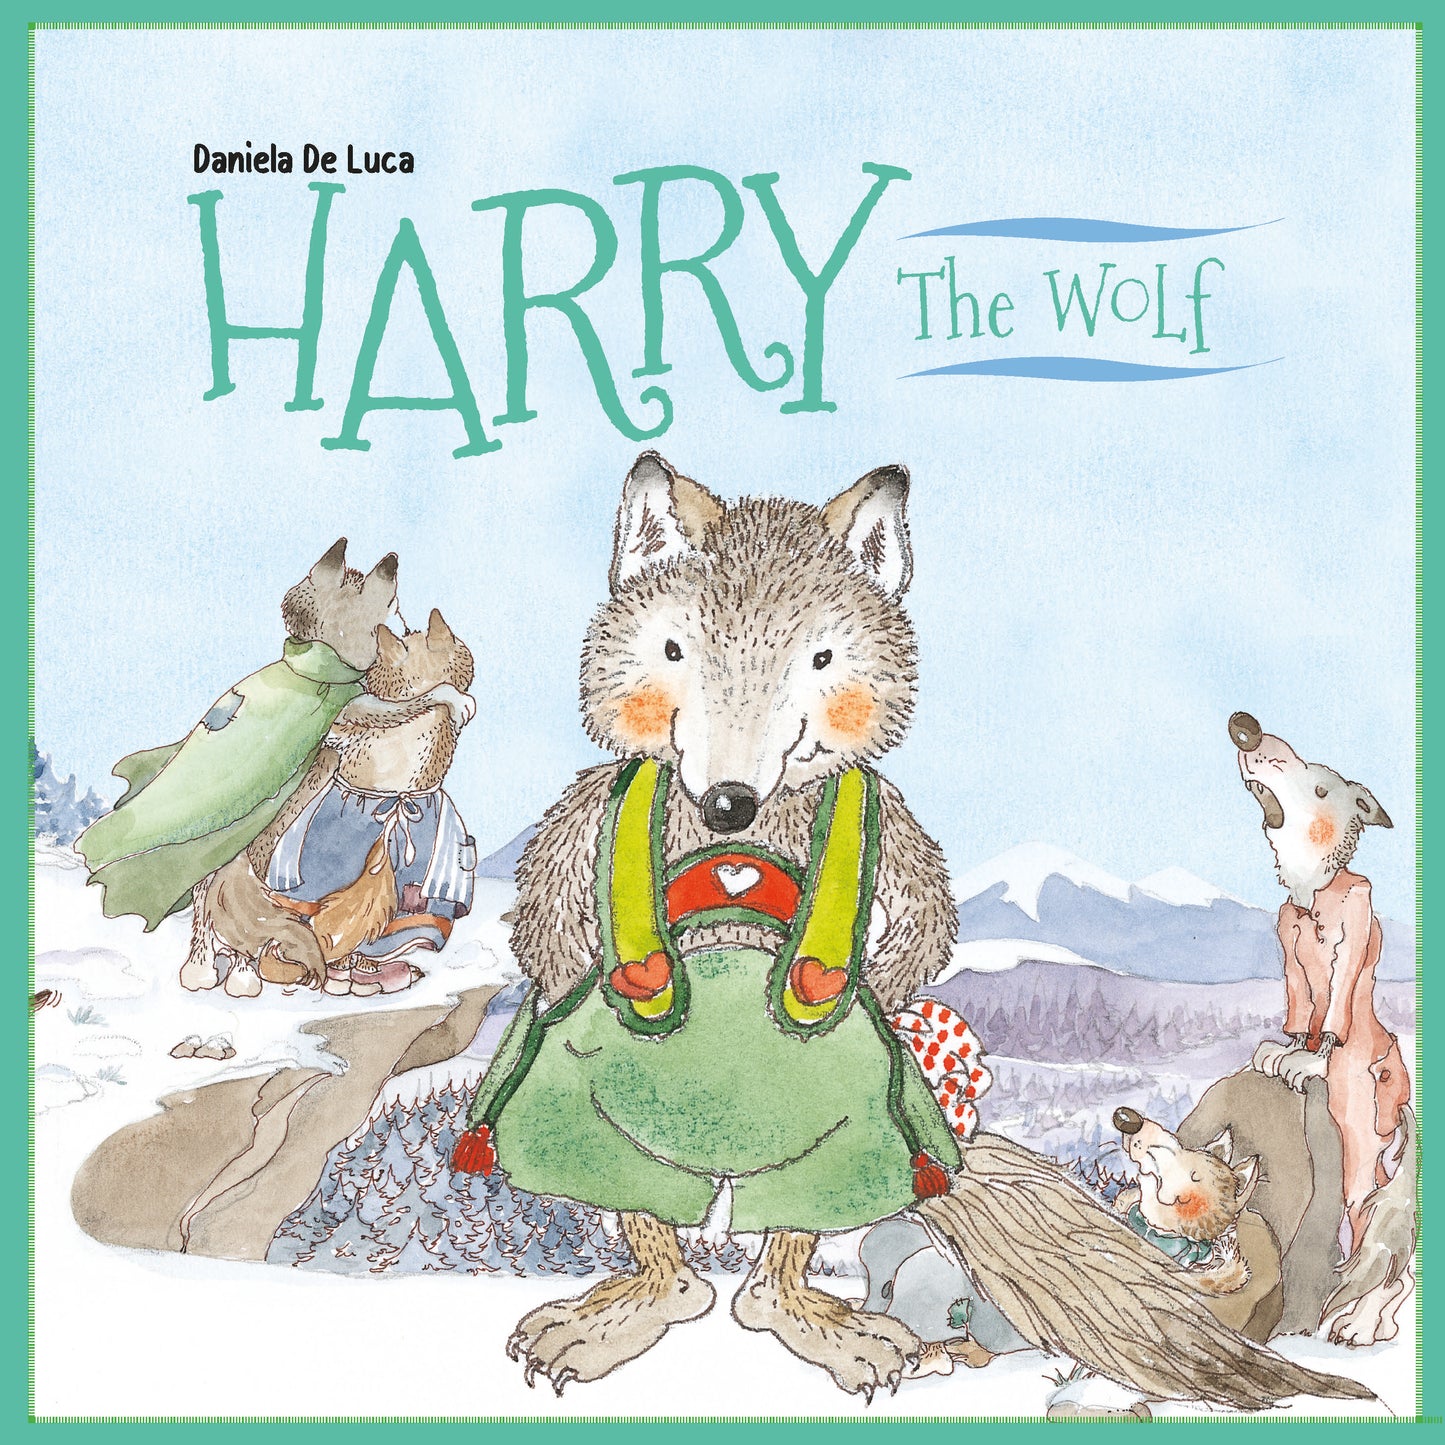 Harry the Wolf